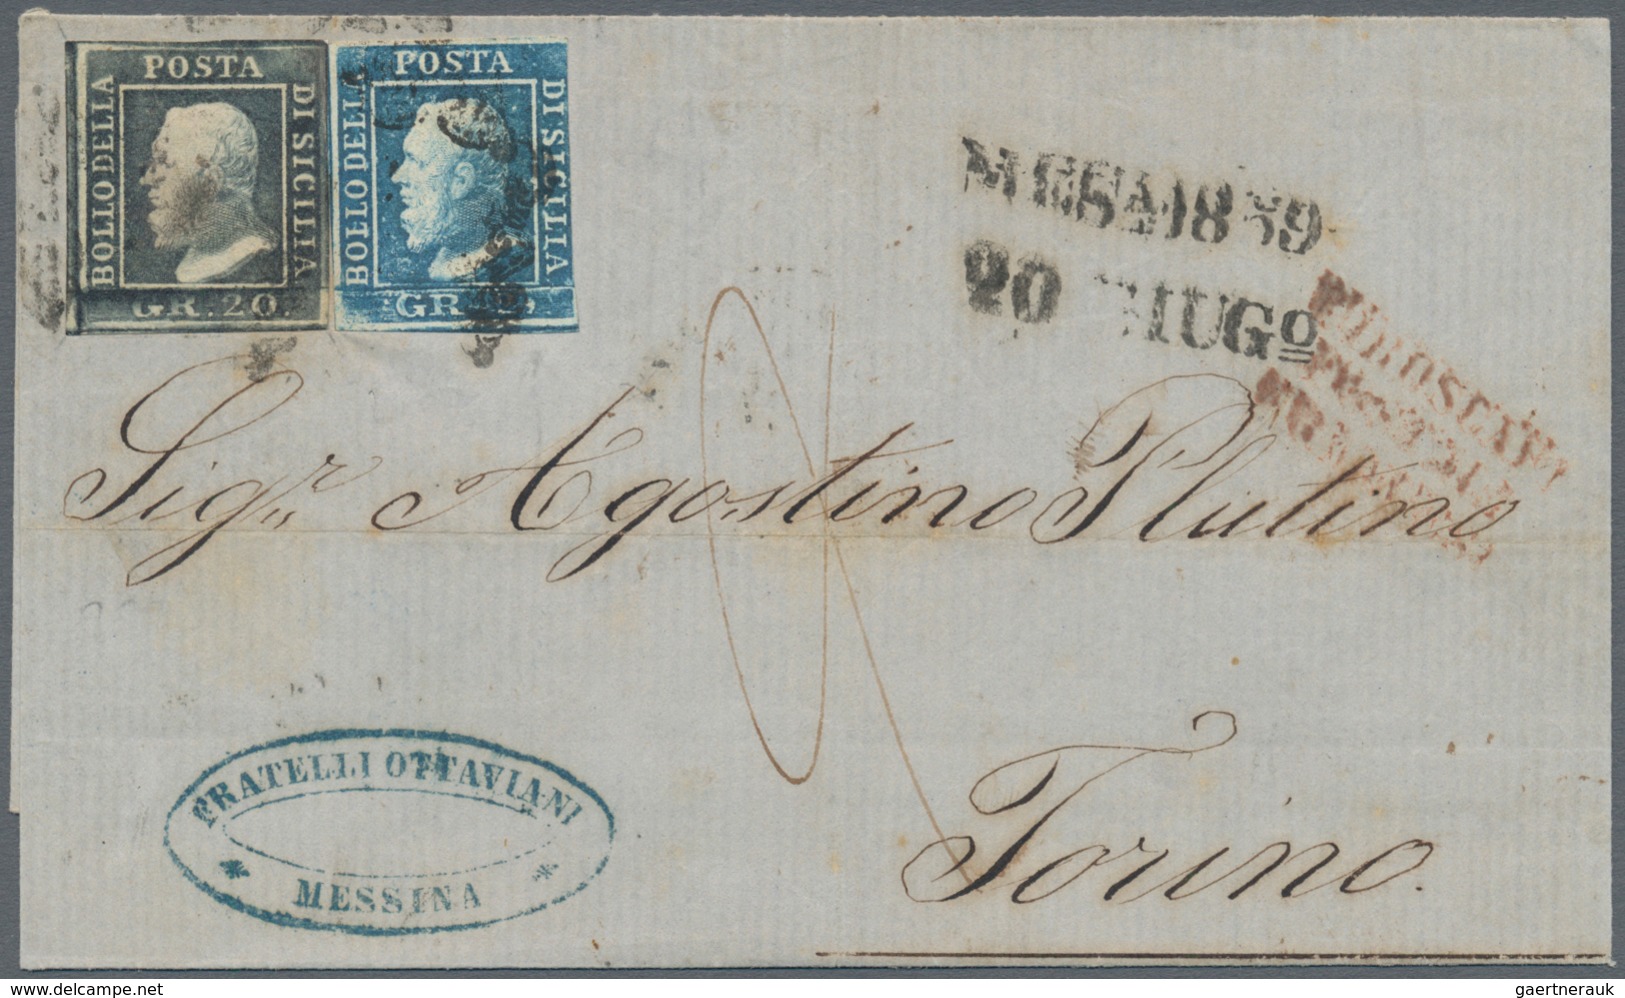 00870 Italien - Altitalienische Staaten: Sizilien: 1859: 20 Grana Gray And 2 Grana Blue, Both Tied By "hor - Sicilië